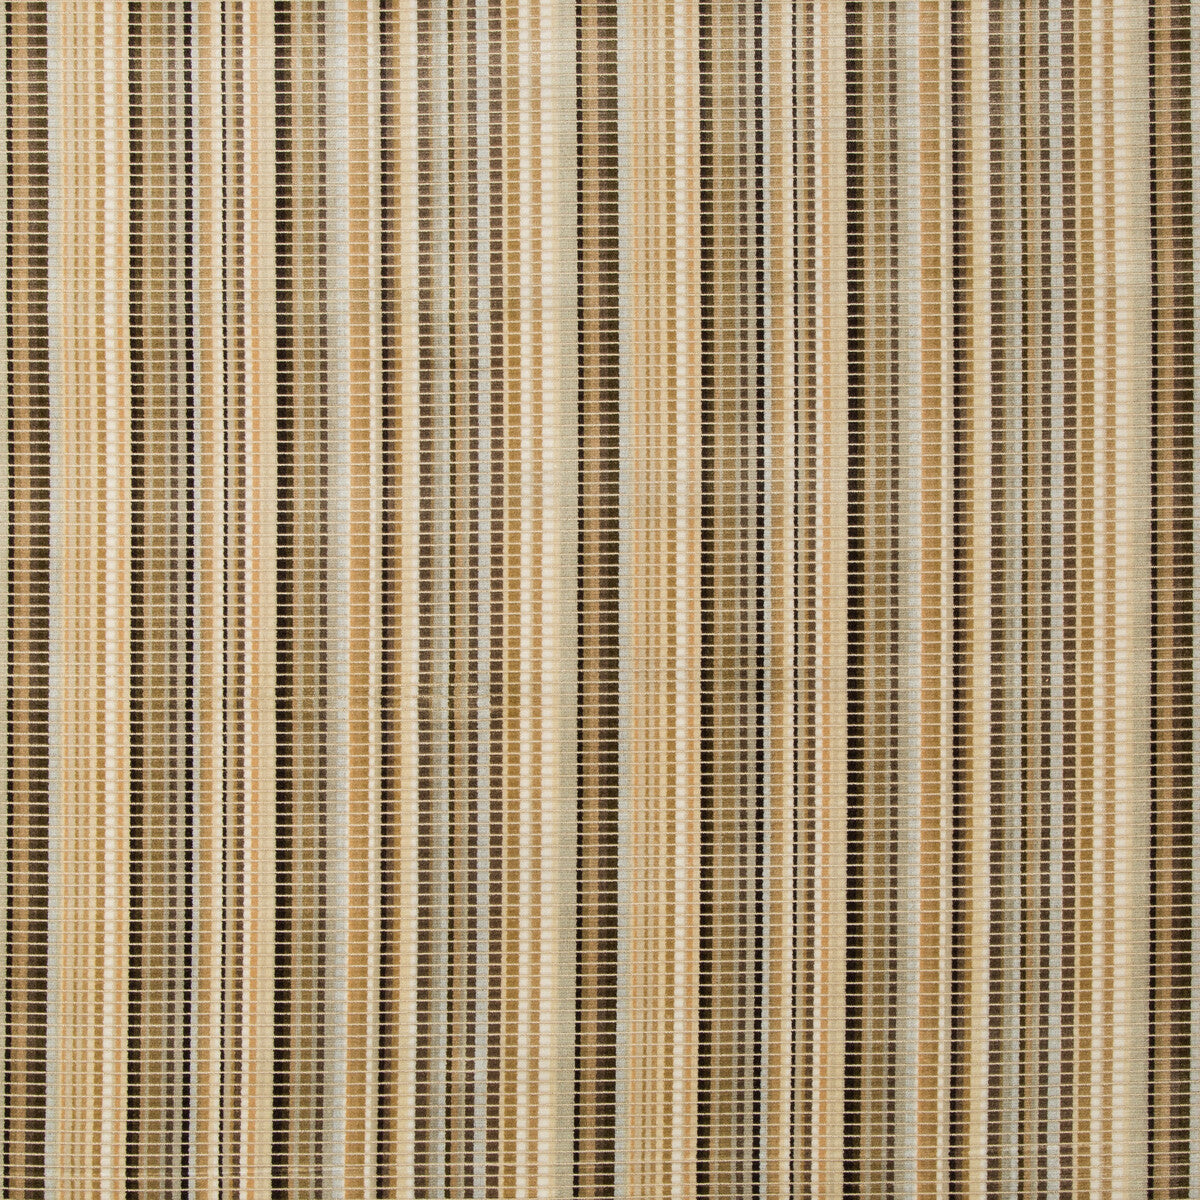 Burton Velvet fabric in sand color - pattern 2019113.116.0 - by Lee Jofa in the Manor House collection